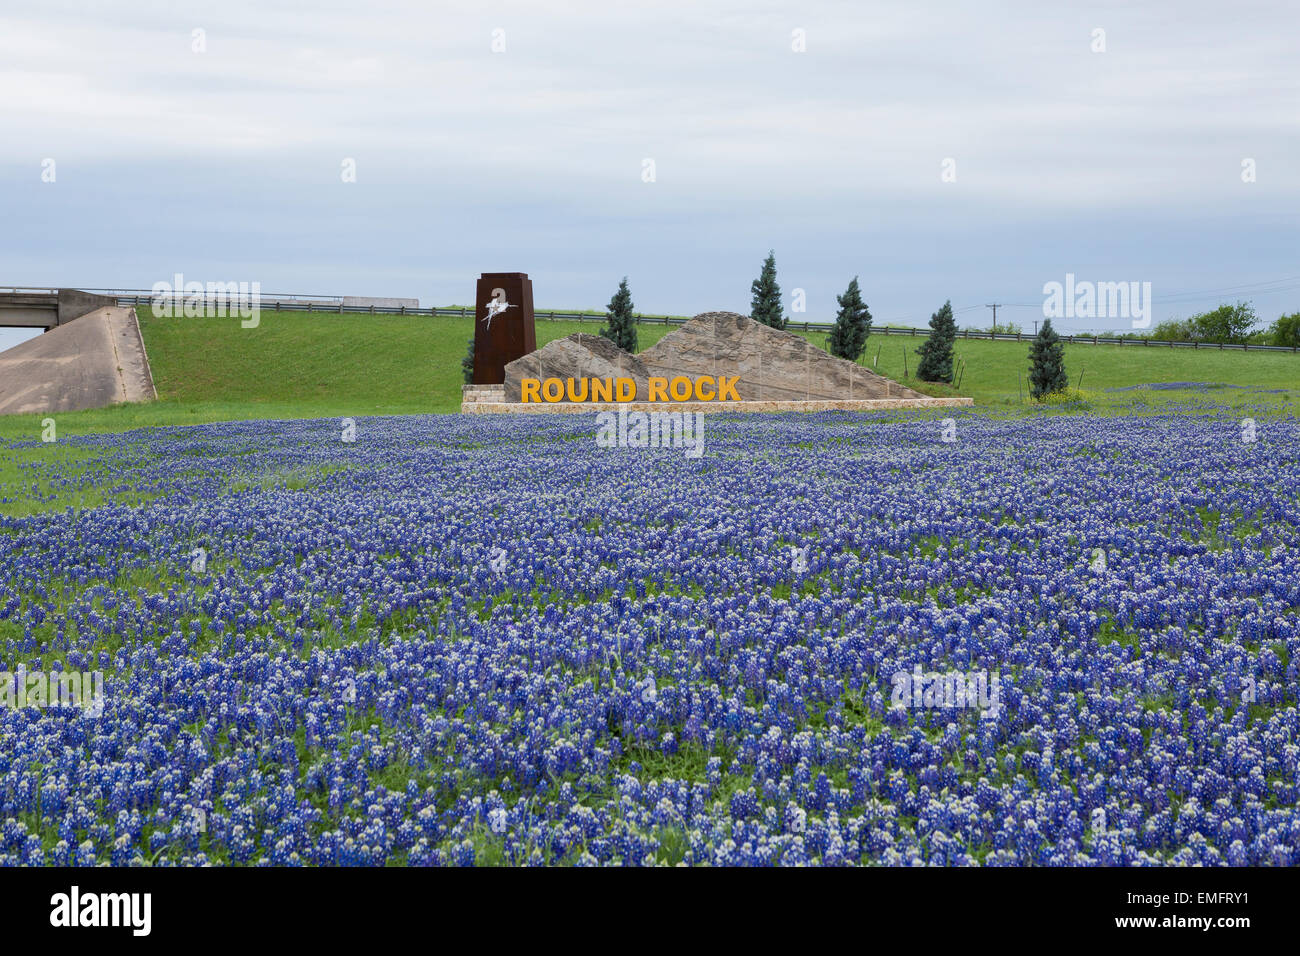 Bluebonnets in bloom at the Round Rock,Texas city limits sign Stock Photo